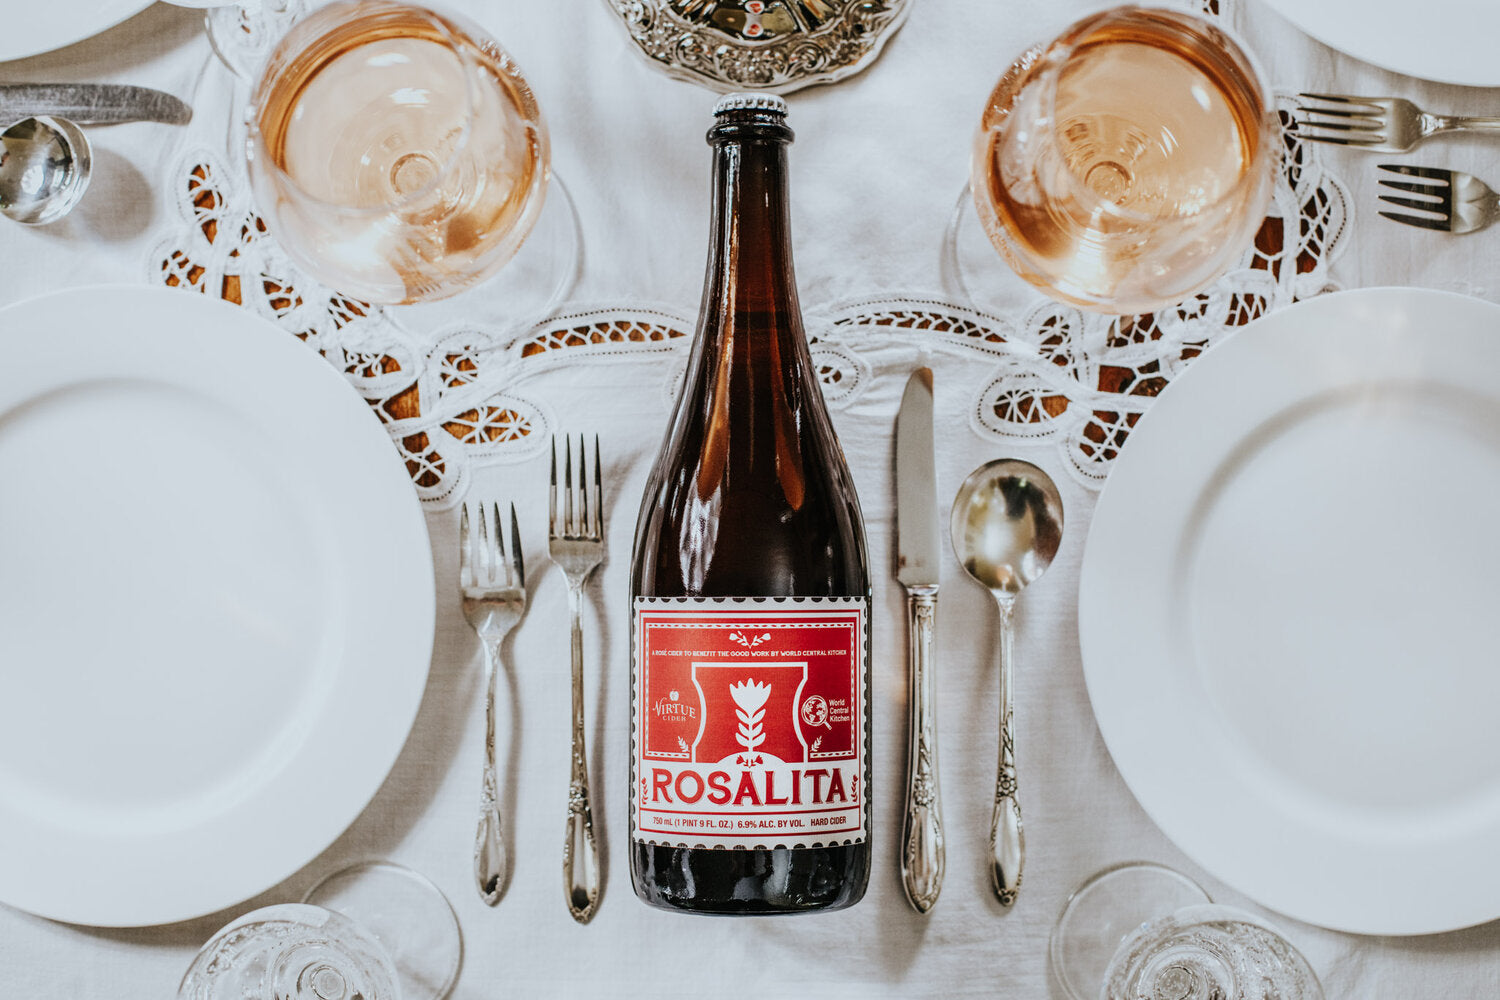 ROSALITA: A LIMITED-EDITION CIDER TO BENEFIT WORLD CENTRAL KITCHEN